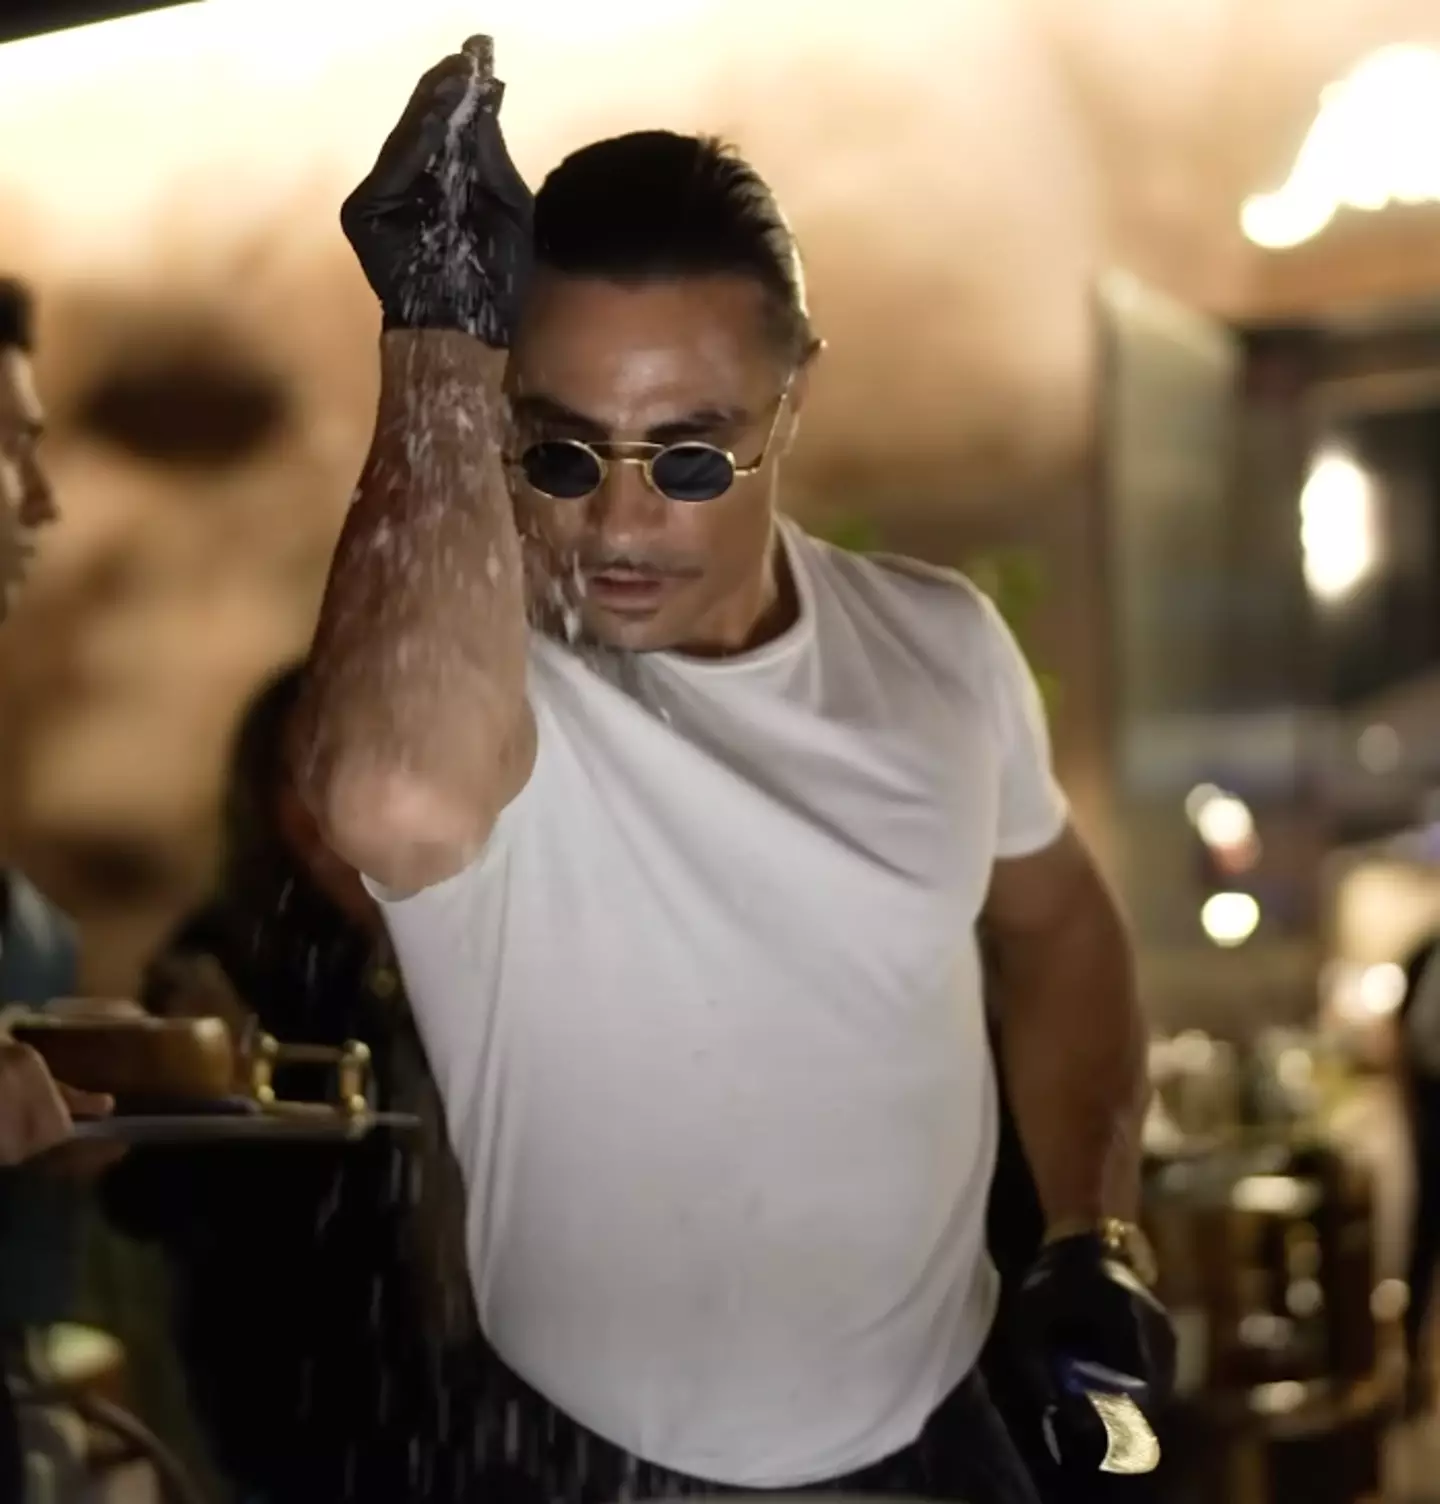 Salt Bae's restaurants are known for high prices.